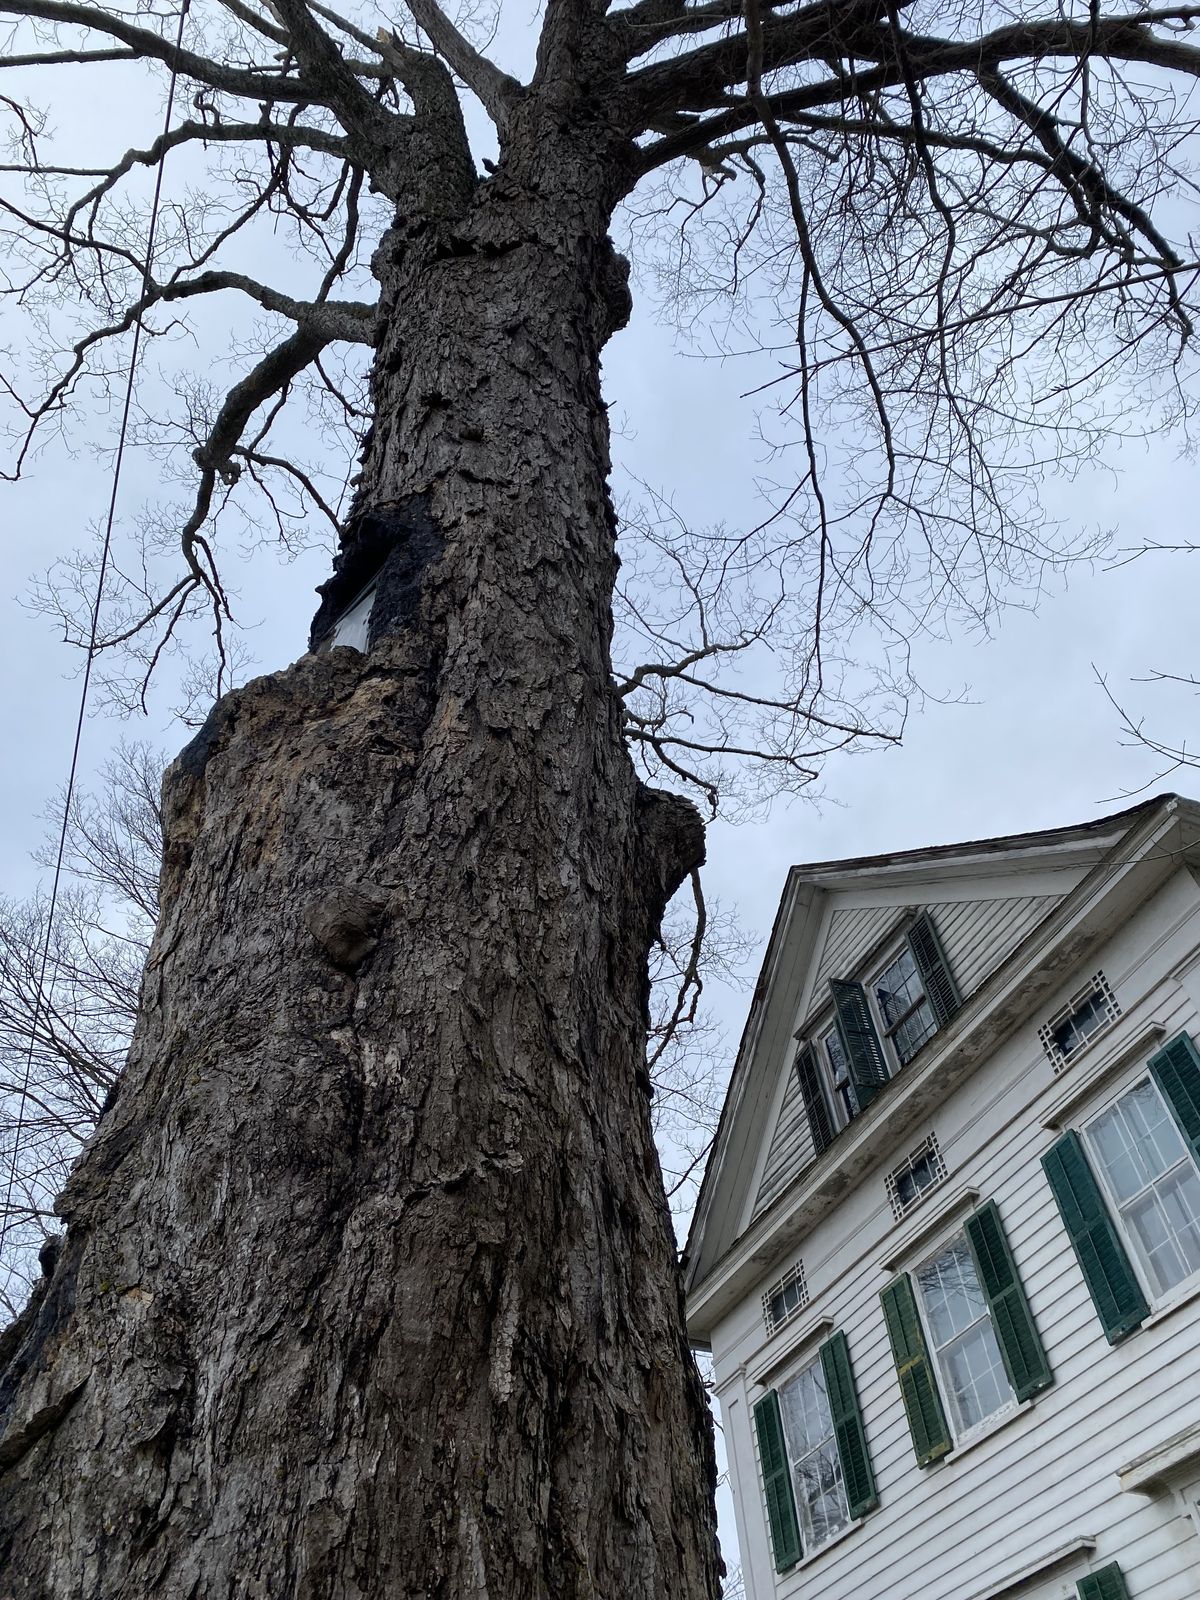 Reprieve sought for imperiled maple tree